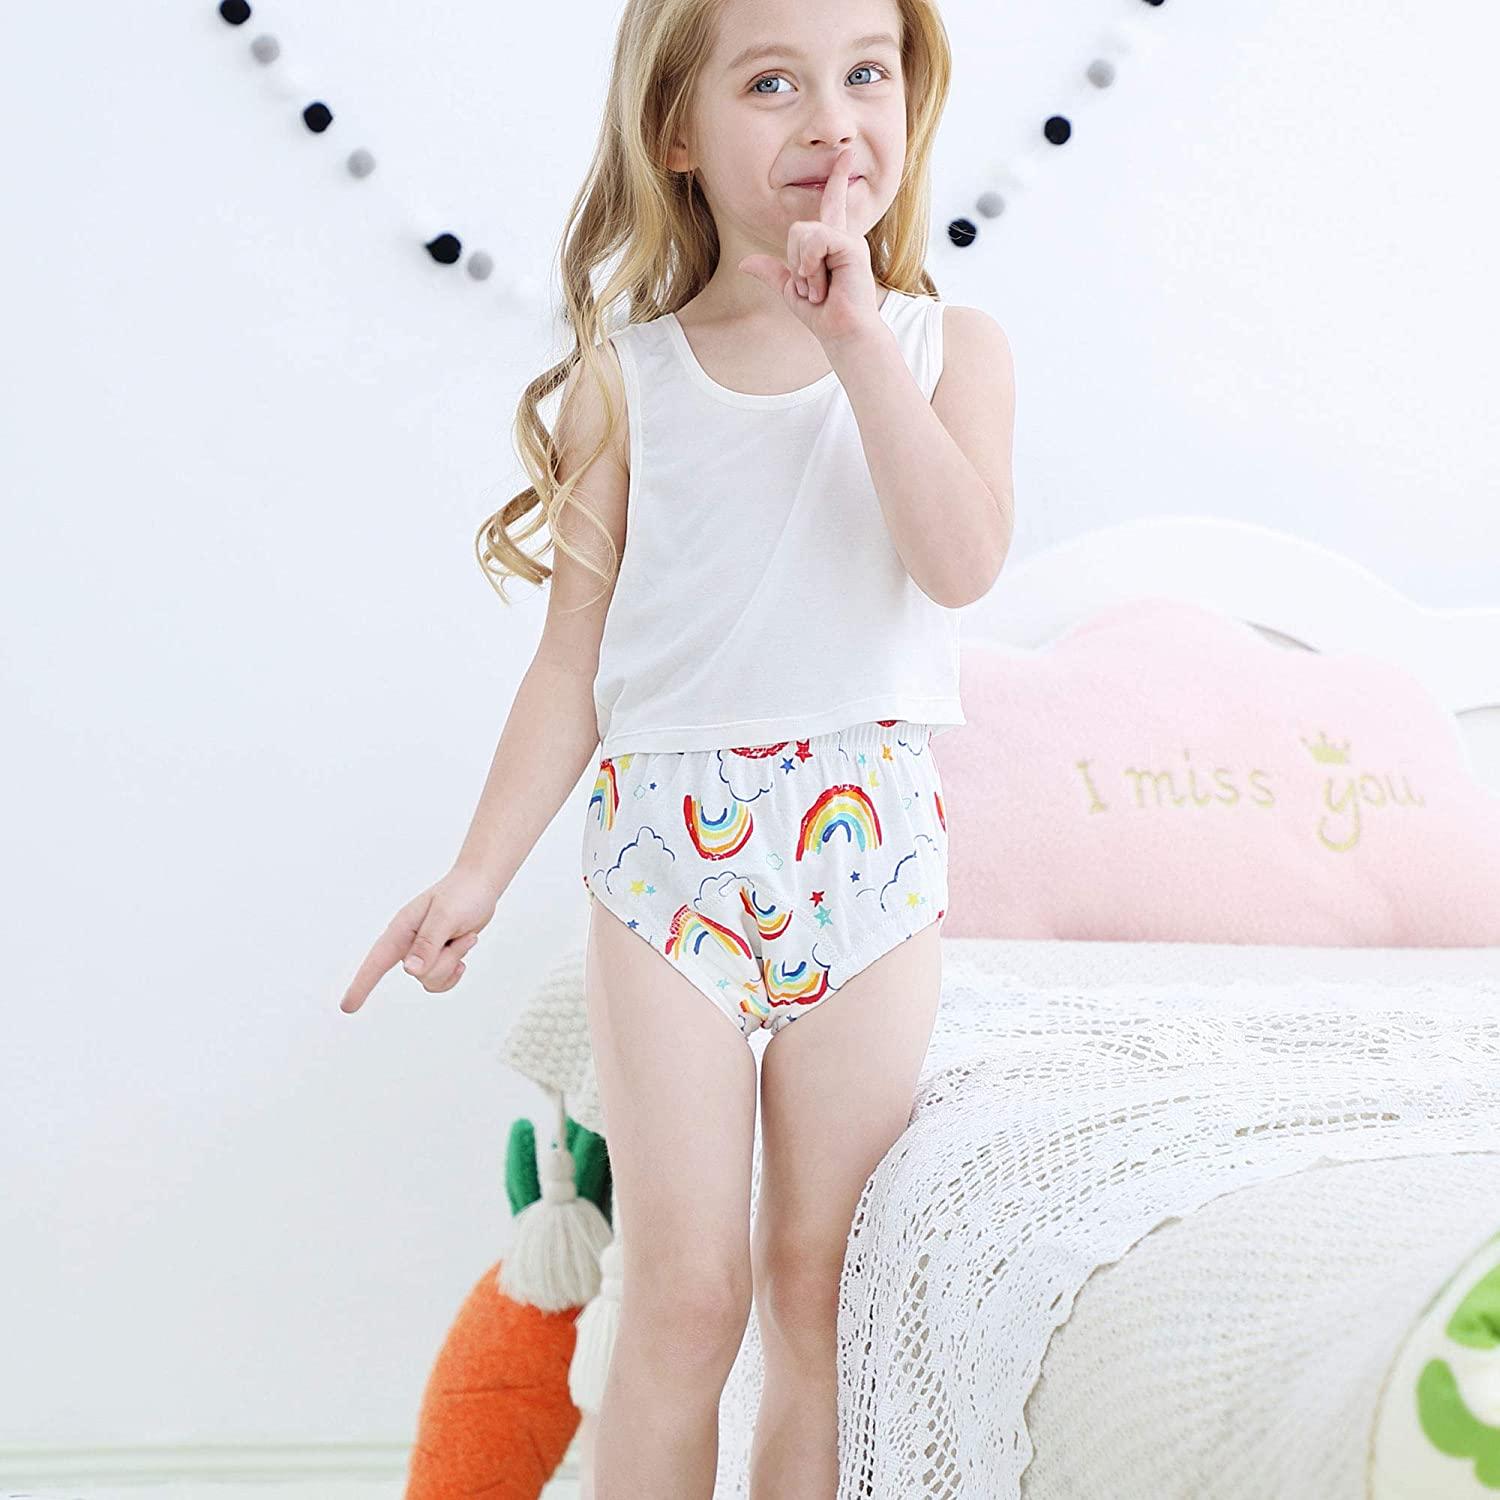 Buy Cloth Rubber Pants for Toddlers Rubber Training Pants for Toddlers  Plastic Training Pants Plastic Diaper Covers Toddler Plastic Underwear for  Toddlers Plastic Underwear Cover Clothing Covers Plastic Online at Low  Prices